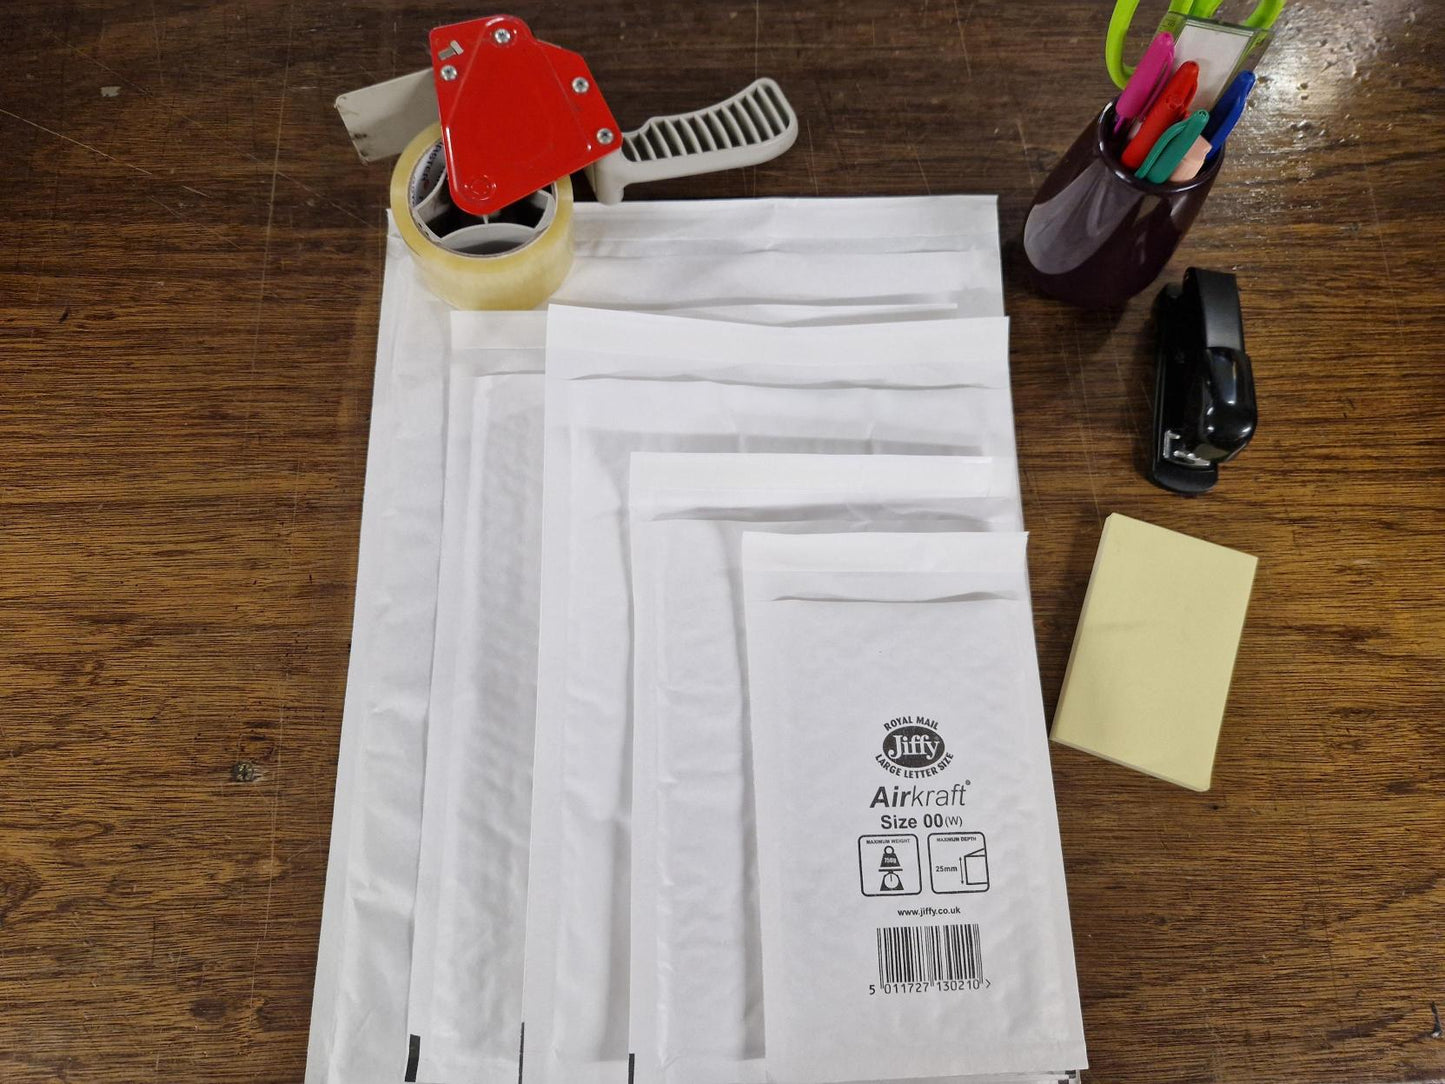 Assorted sizes of Jiffy envelopes: JL00, JL1, JL3, JL5, JL7. Each size comes in a pack of 5, all in white colour.